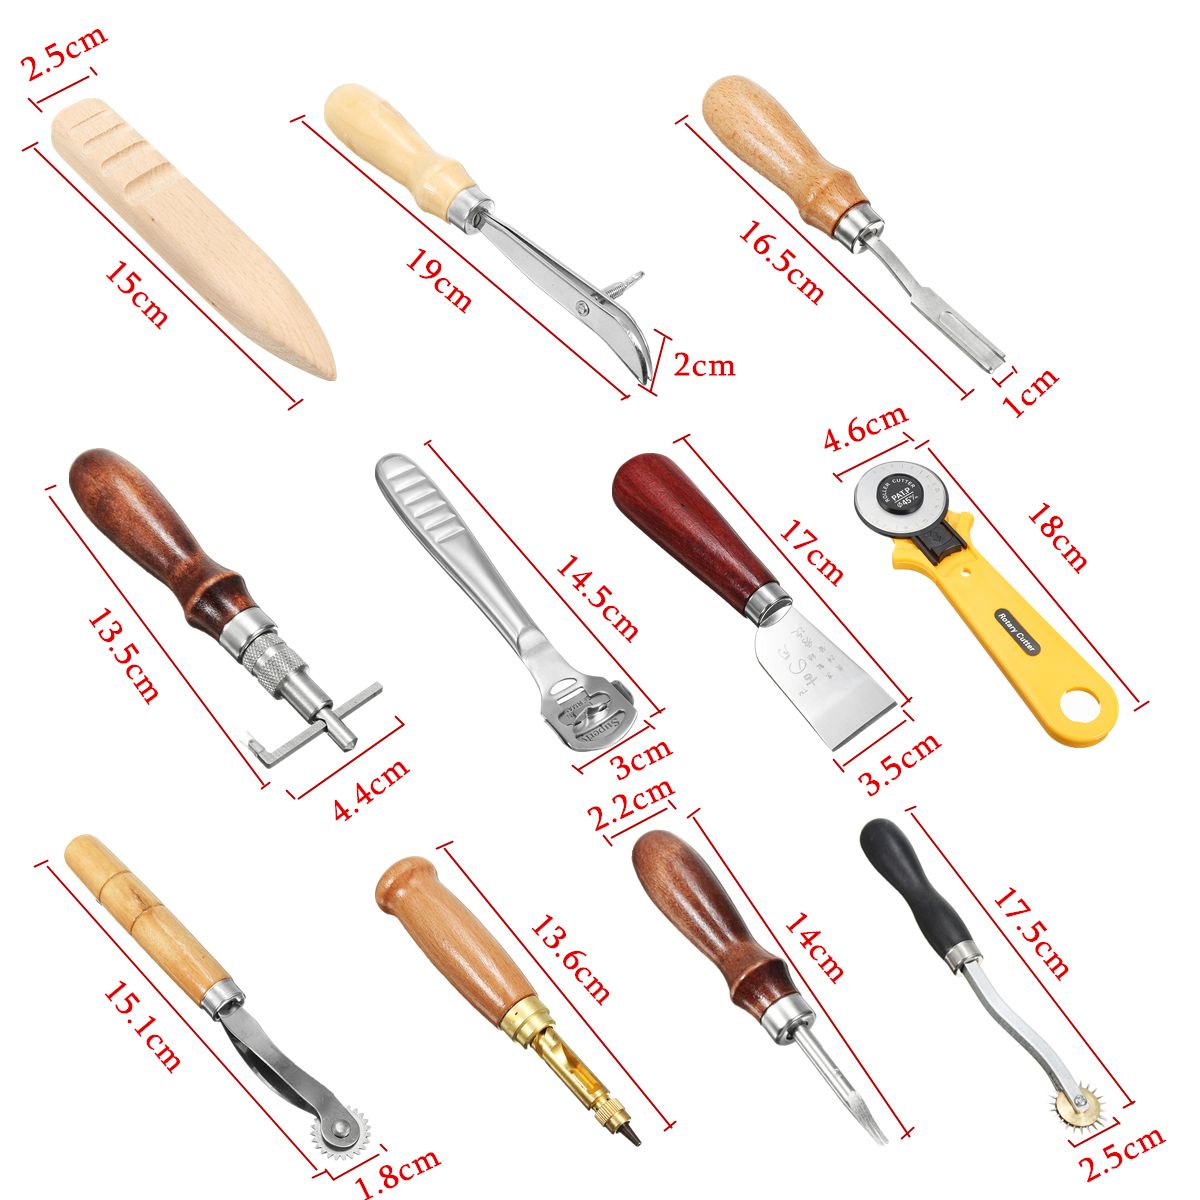 11PCS-Leather-Carving-Punch-Cutter-Hammer-Essential-Tools-Set-Manual-Craft-DIY-Leather-Carving-To-1289287